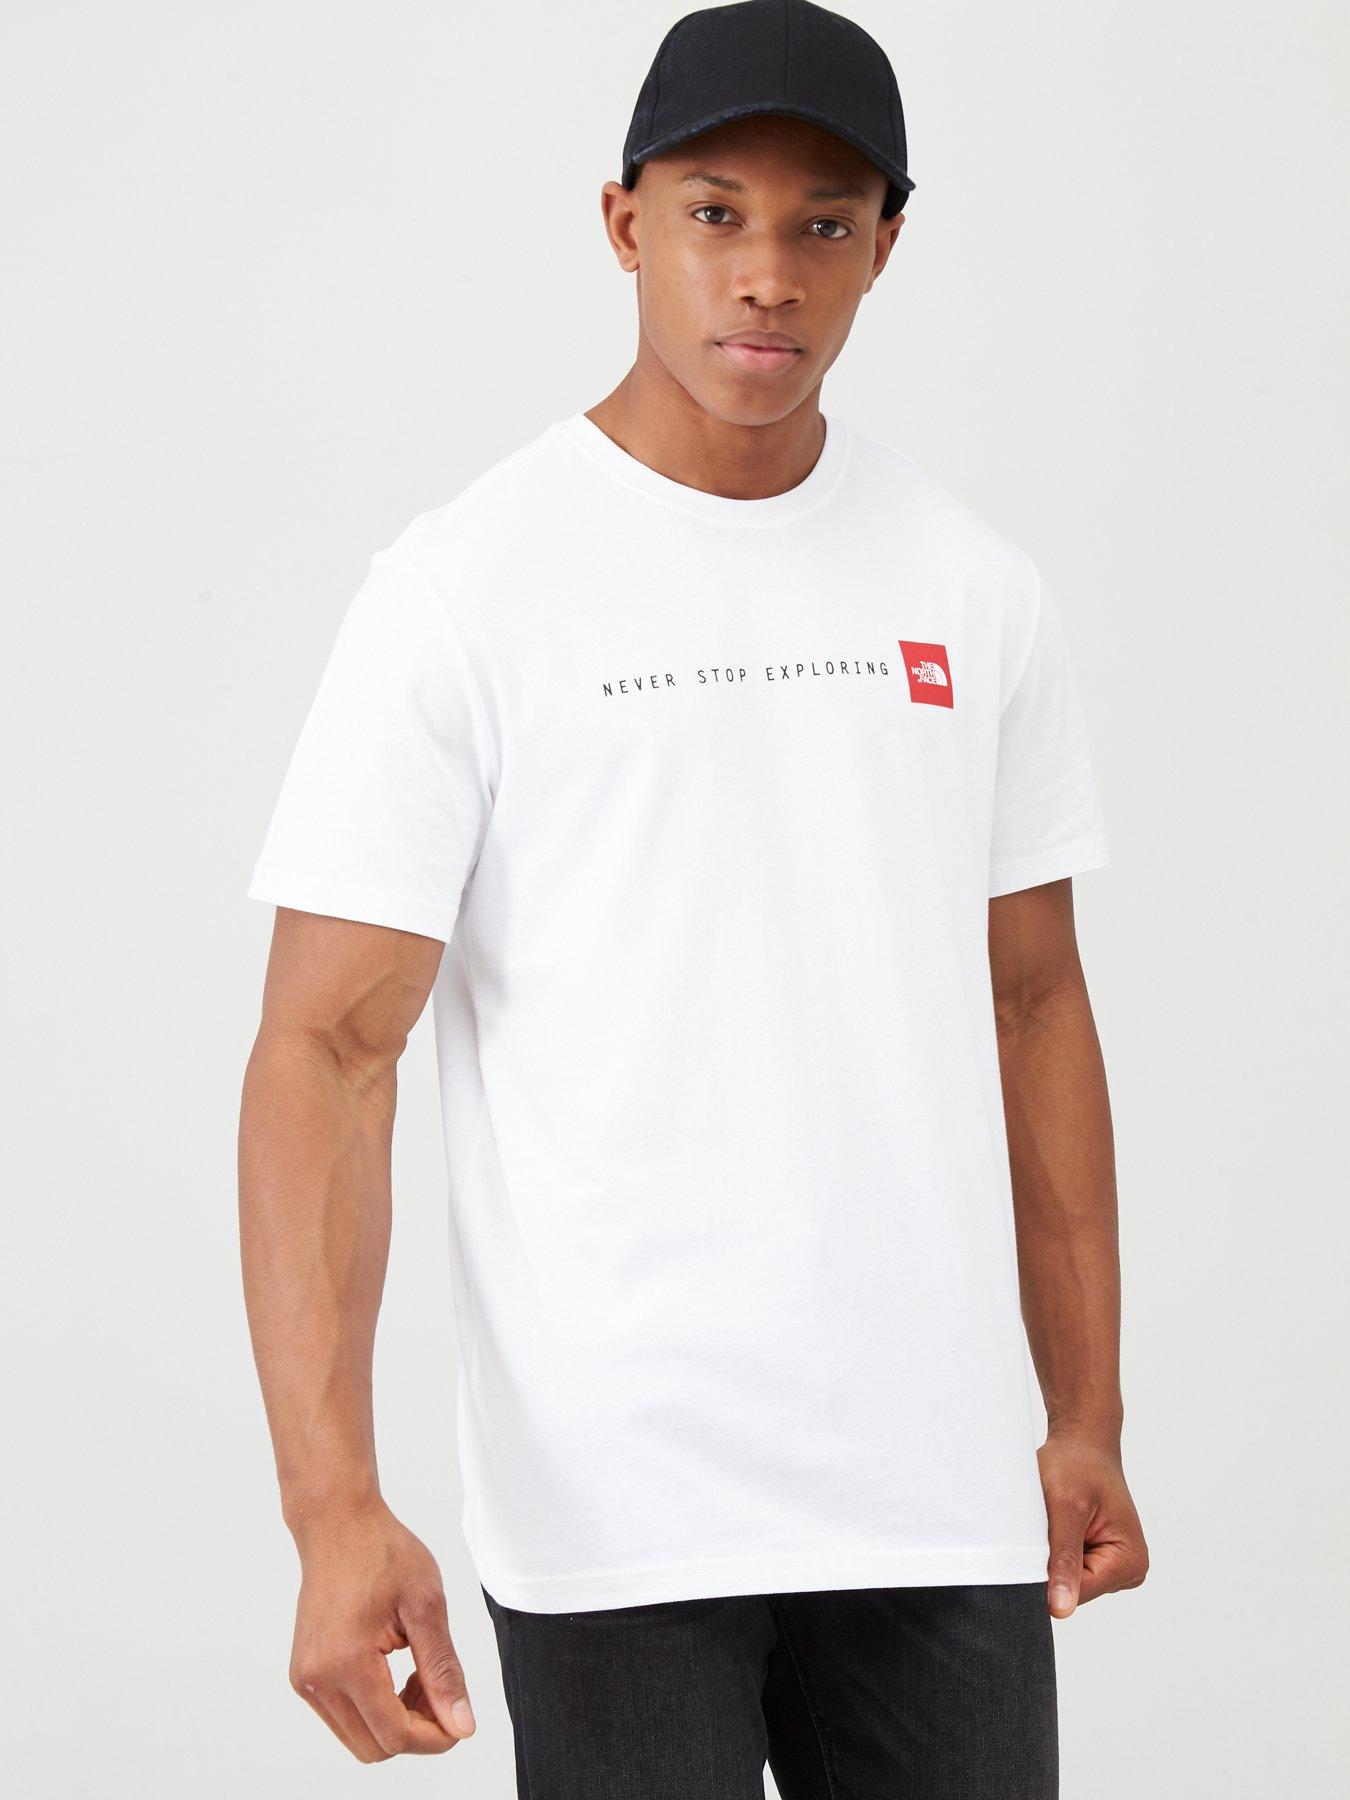 never stop exploring t shirt north face